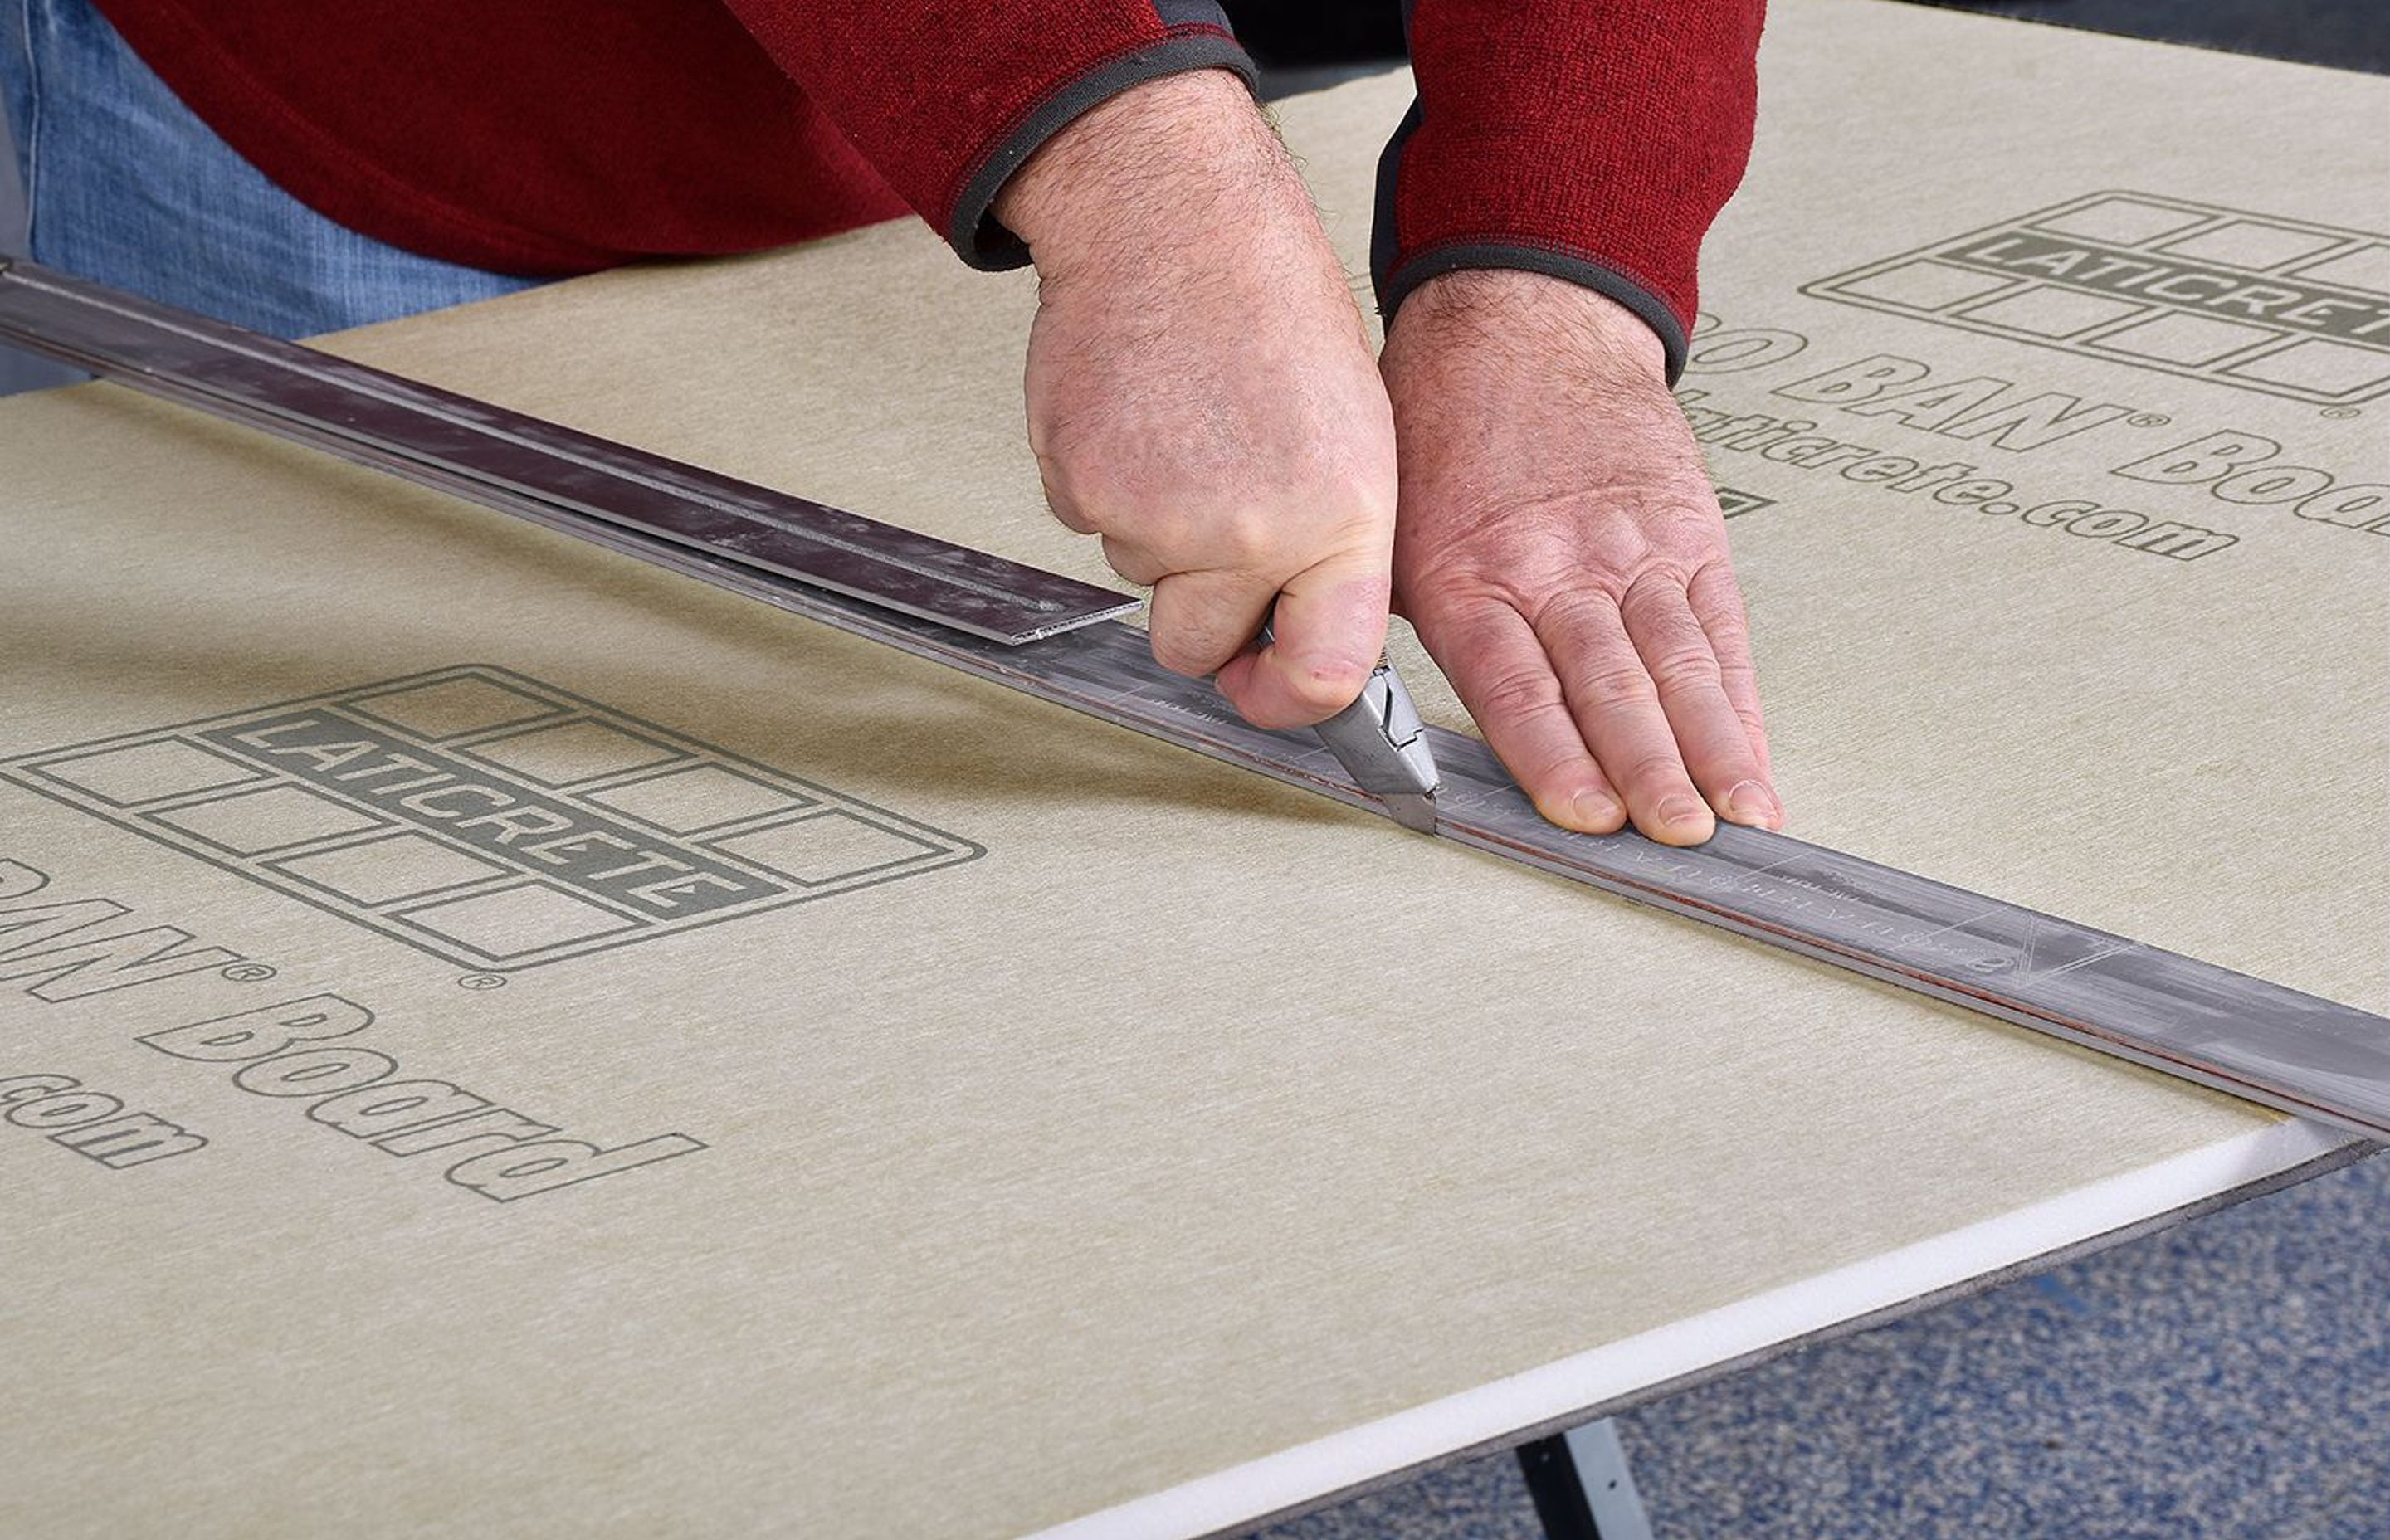 Hydro Ban boards have the ability to be cut and resized with a standard Stanley knife.